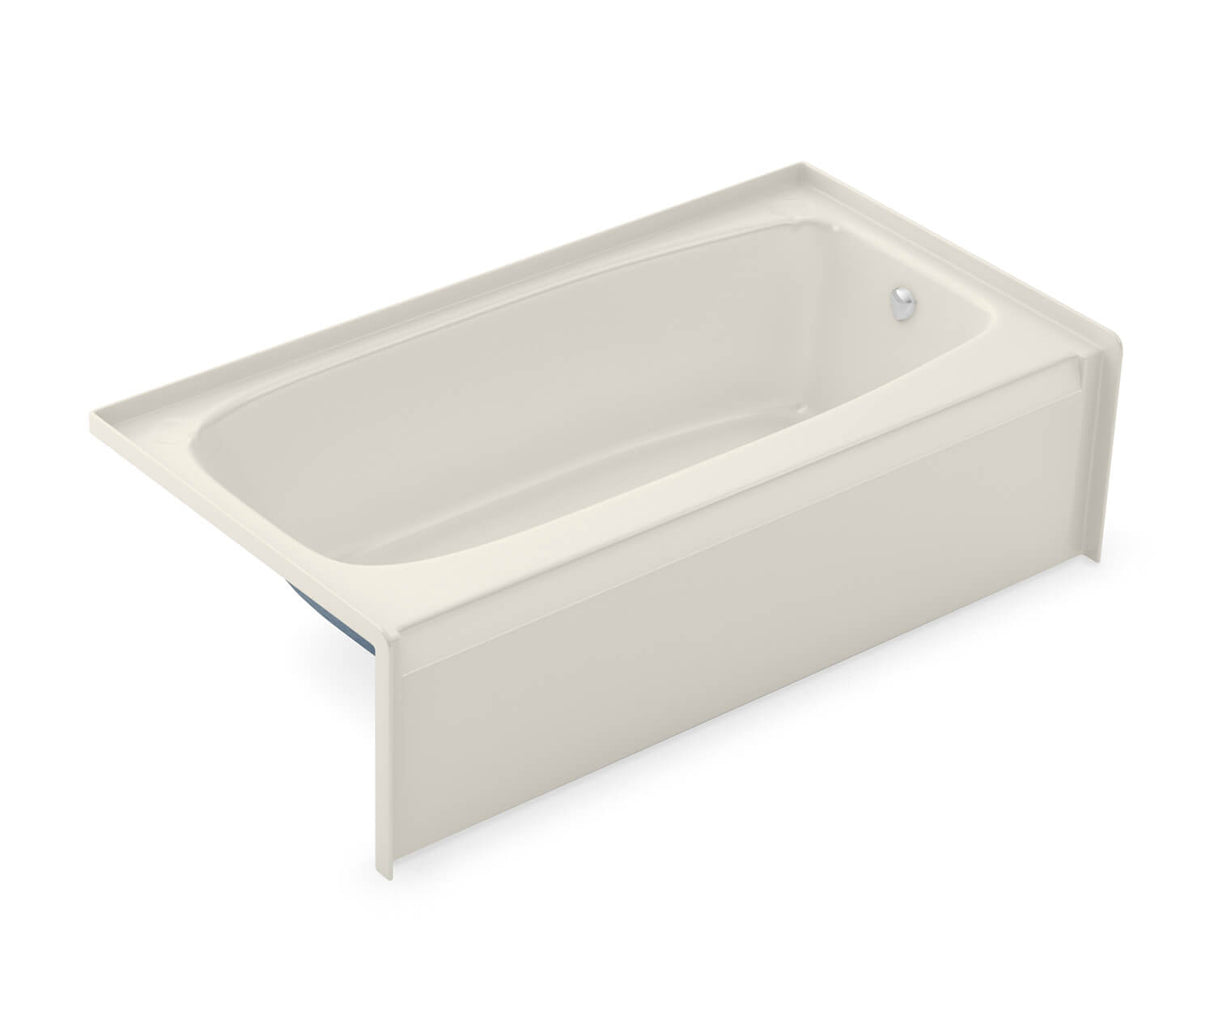 Aker TO-3060 AcrylX Alcove Left-Hand Drain Bath in Biscuit